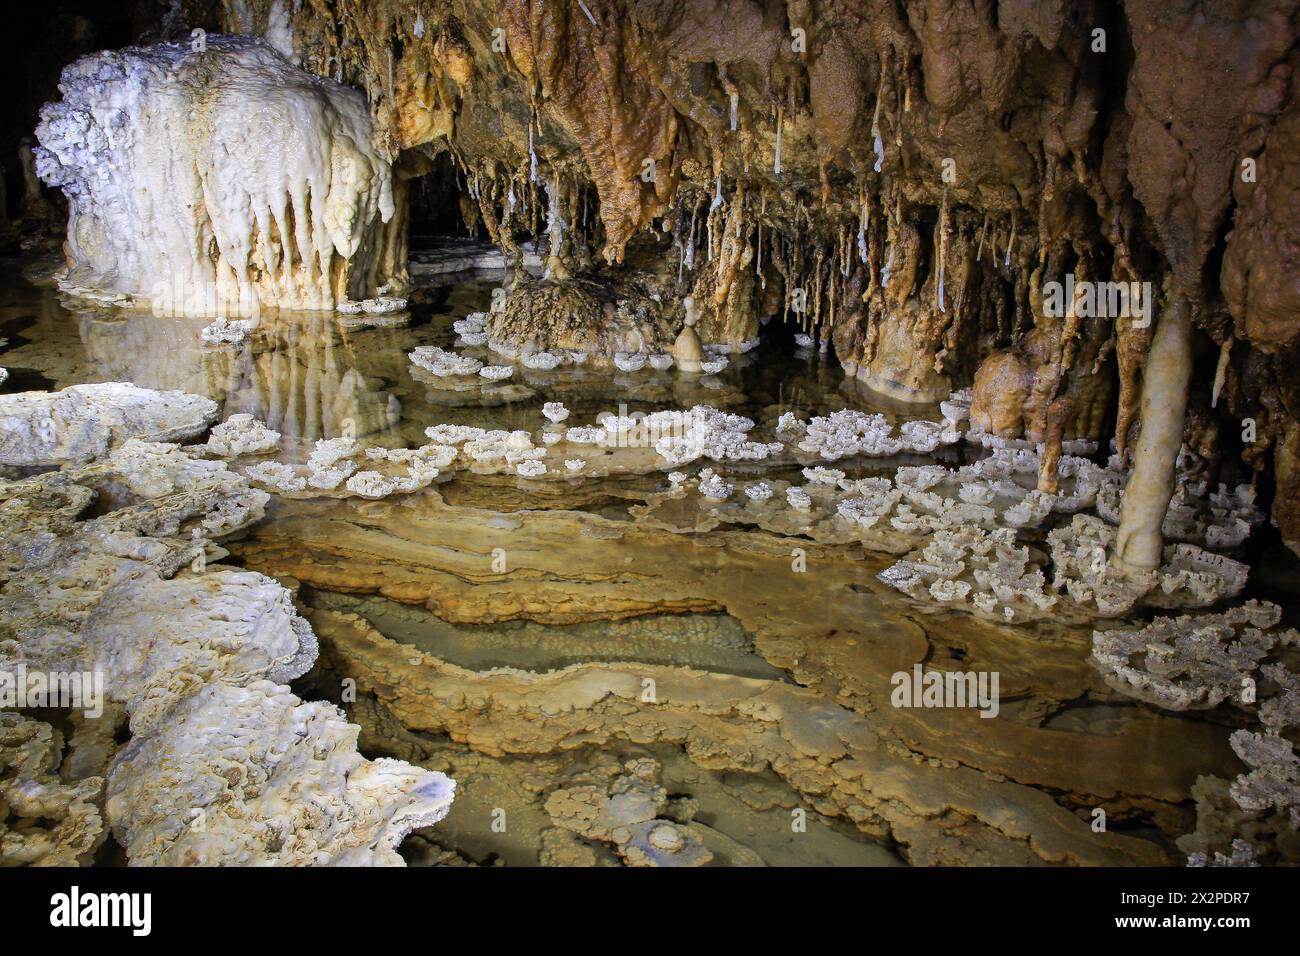 The beauty of stalagmite ornament of Gilap Cave in Gunungsewu karst. Karst area is a place for water conservation. Stock Photo